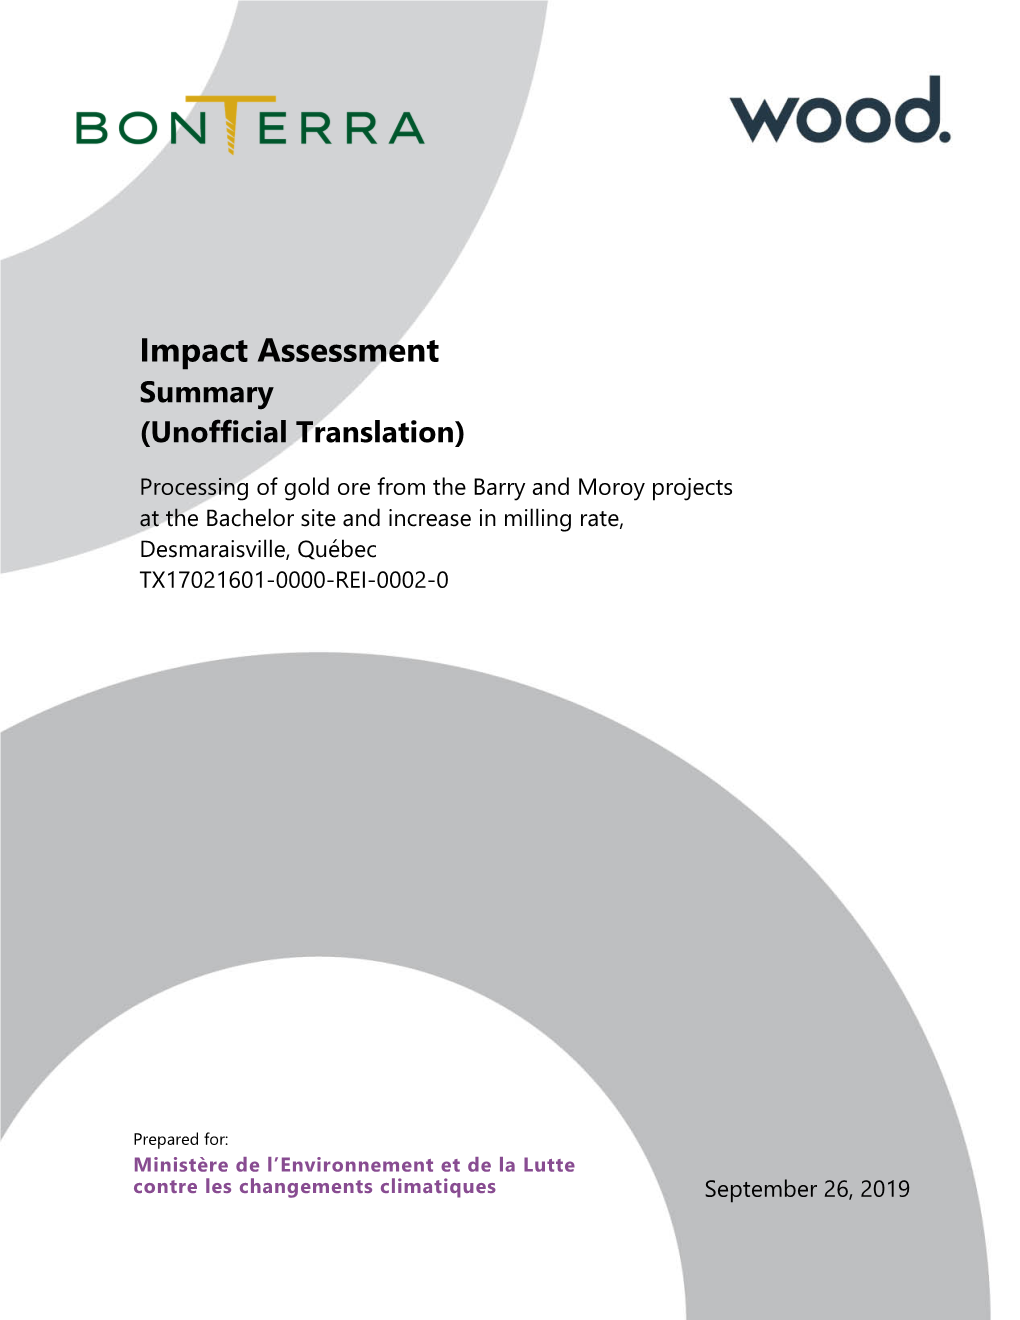 Impact Assessment Summary (Unofficial Translation)